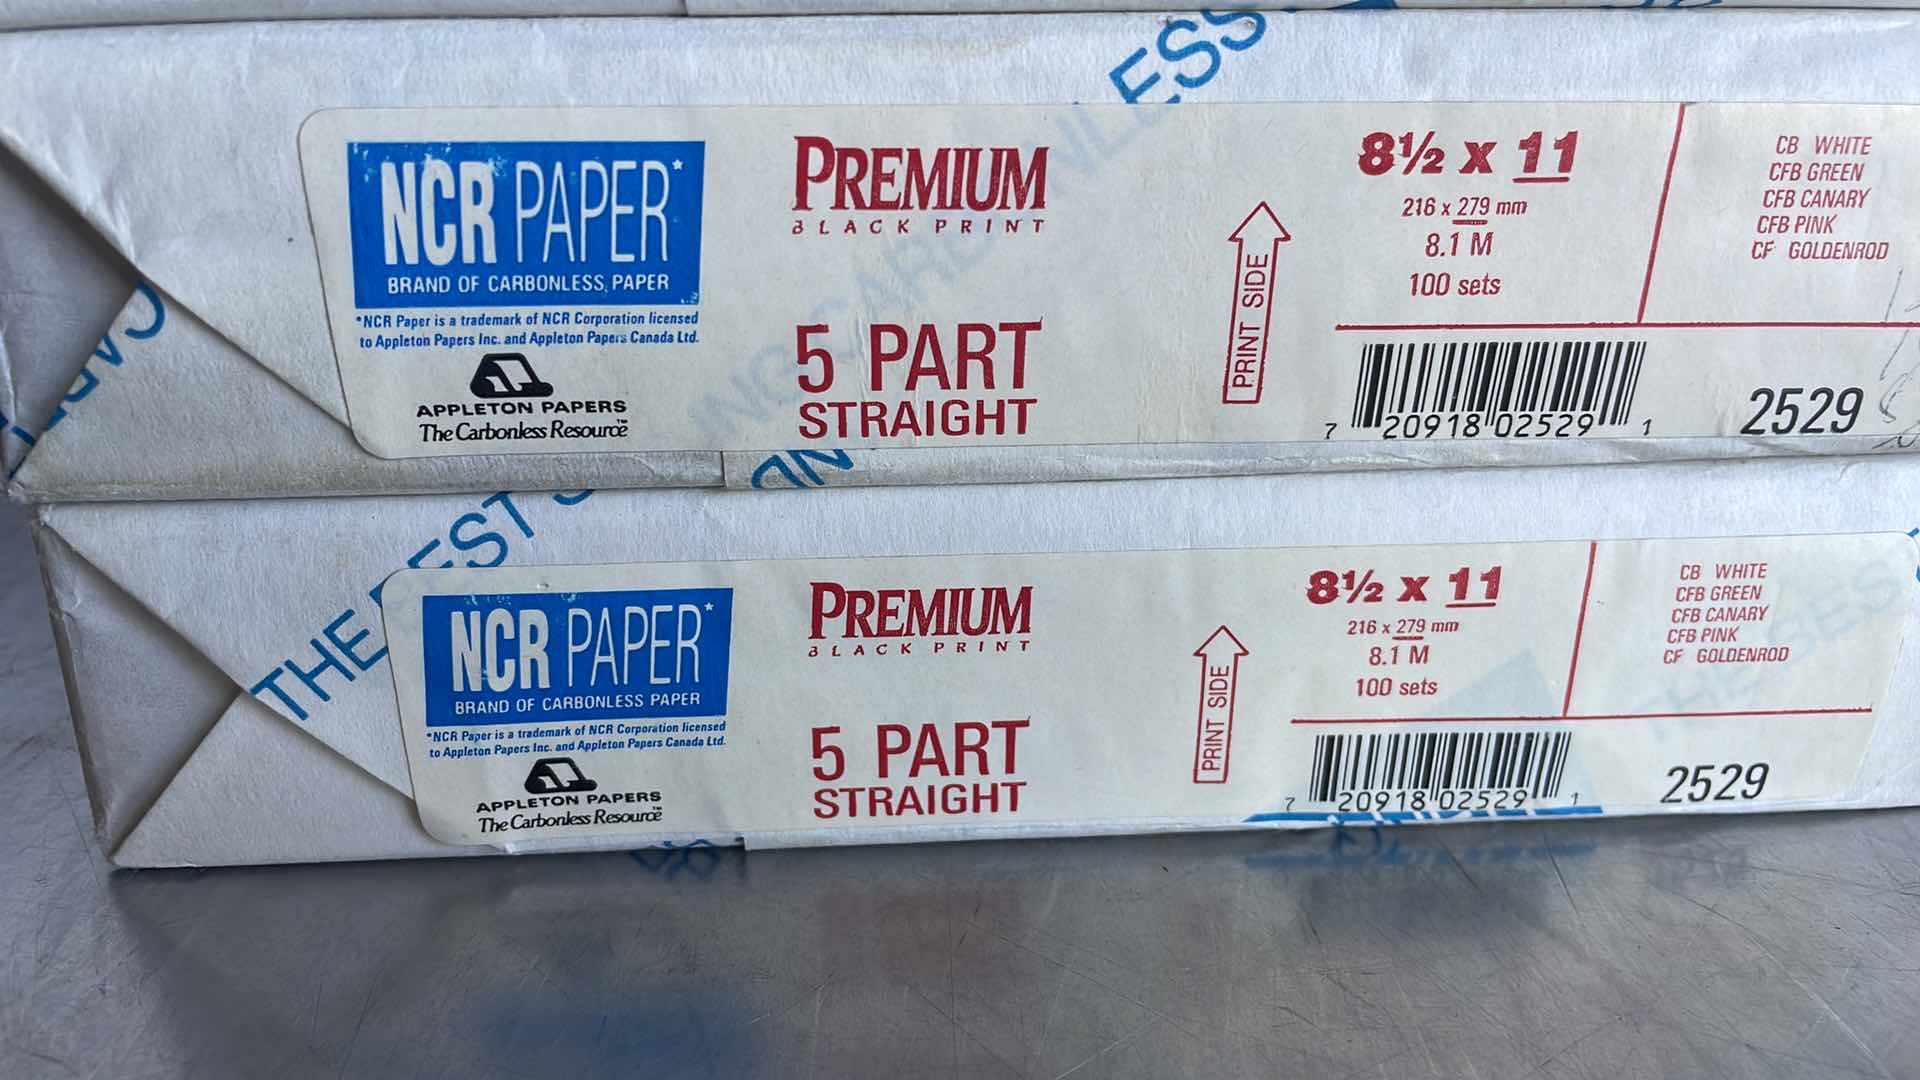 Photo 3 of NCR PAPER BRAND OF CARBONLESS PAPER PREMIUM 5 PART STRAIGHT